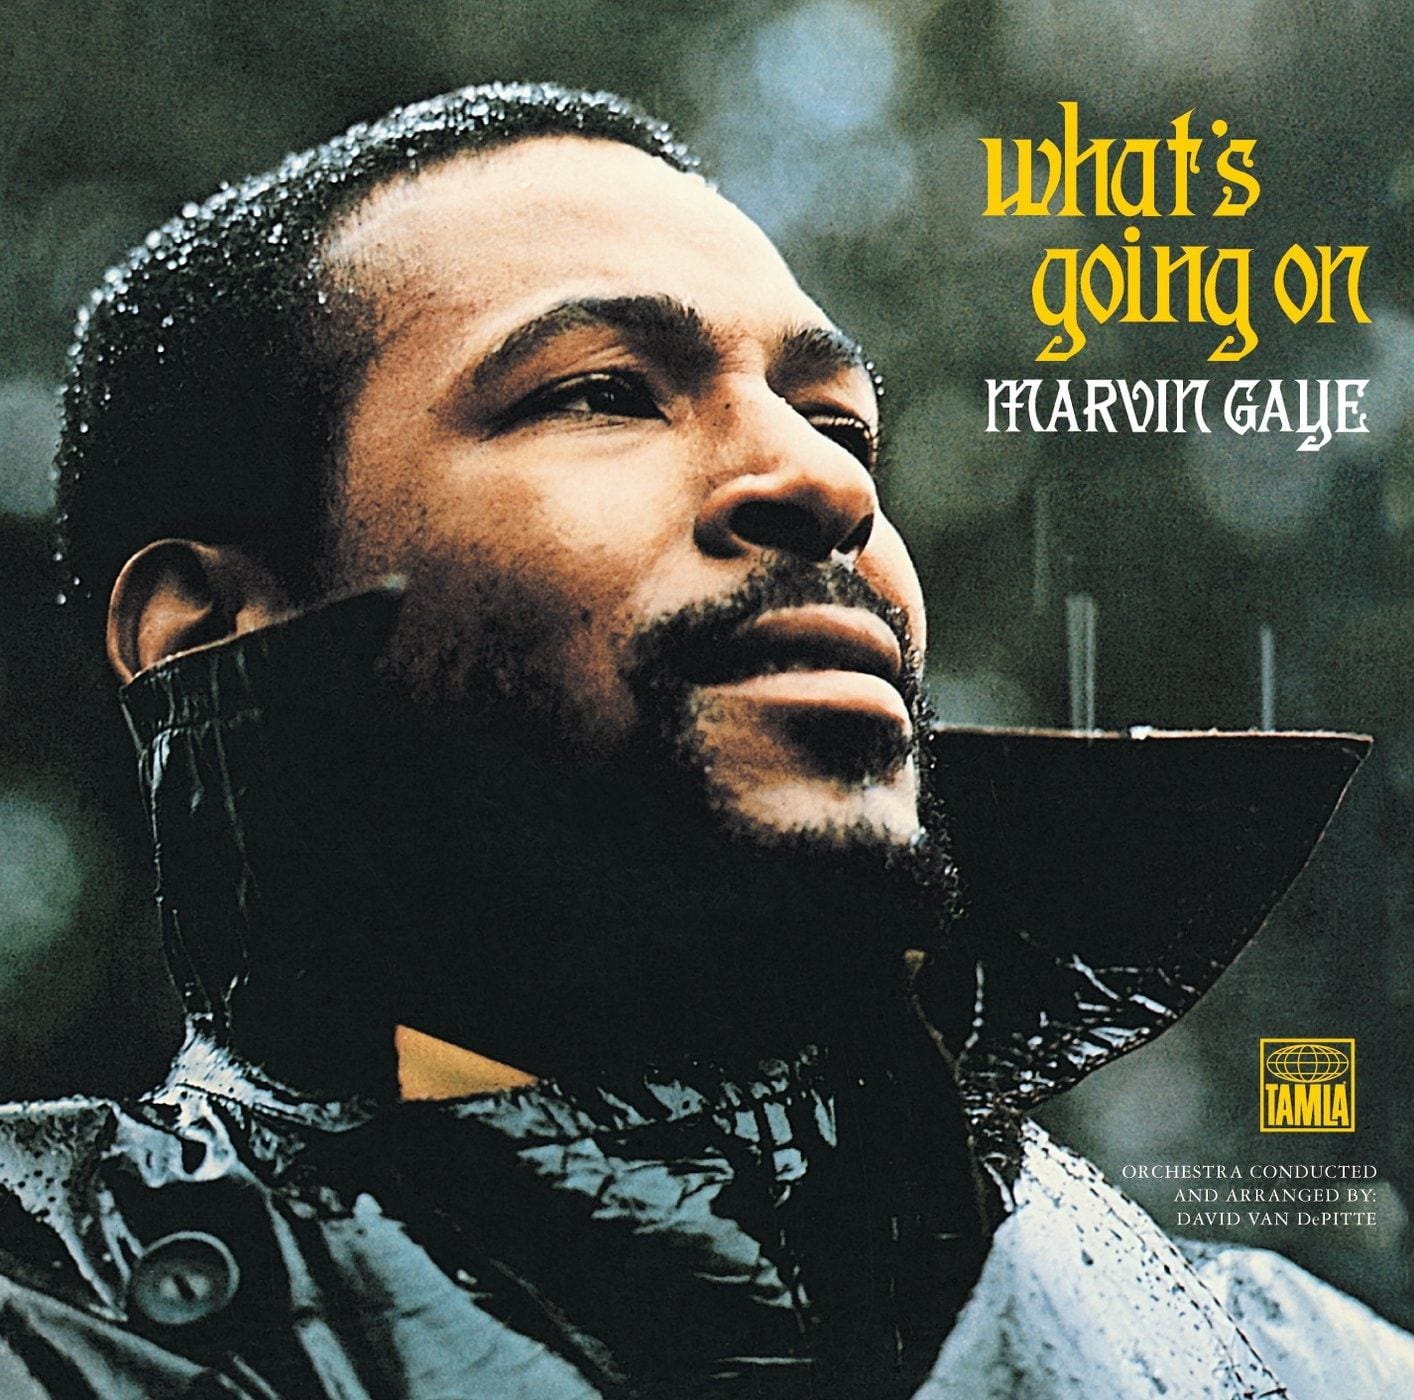 Counterbalance No. 6: Marvin Gaye’s ‘What’s Going On’